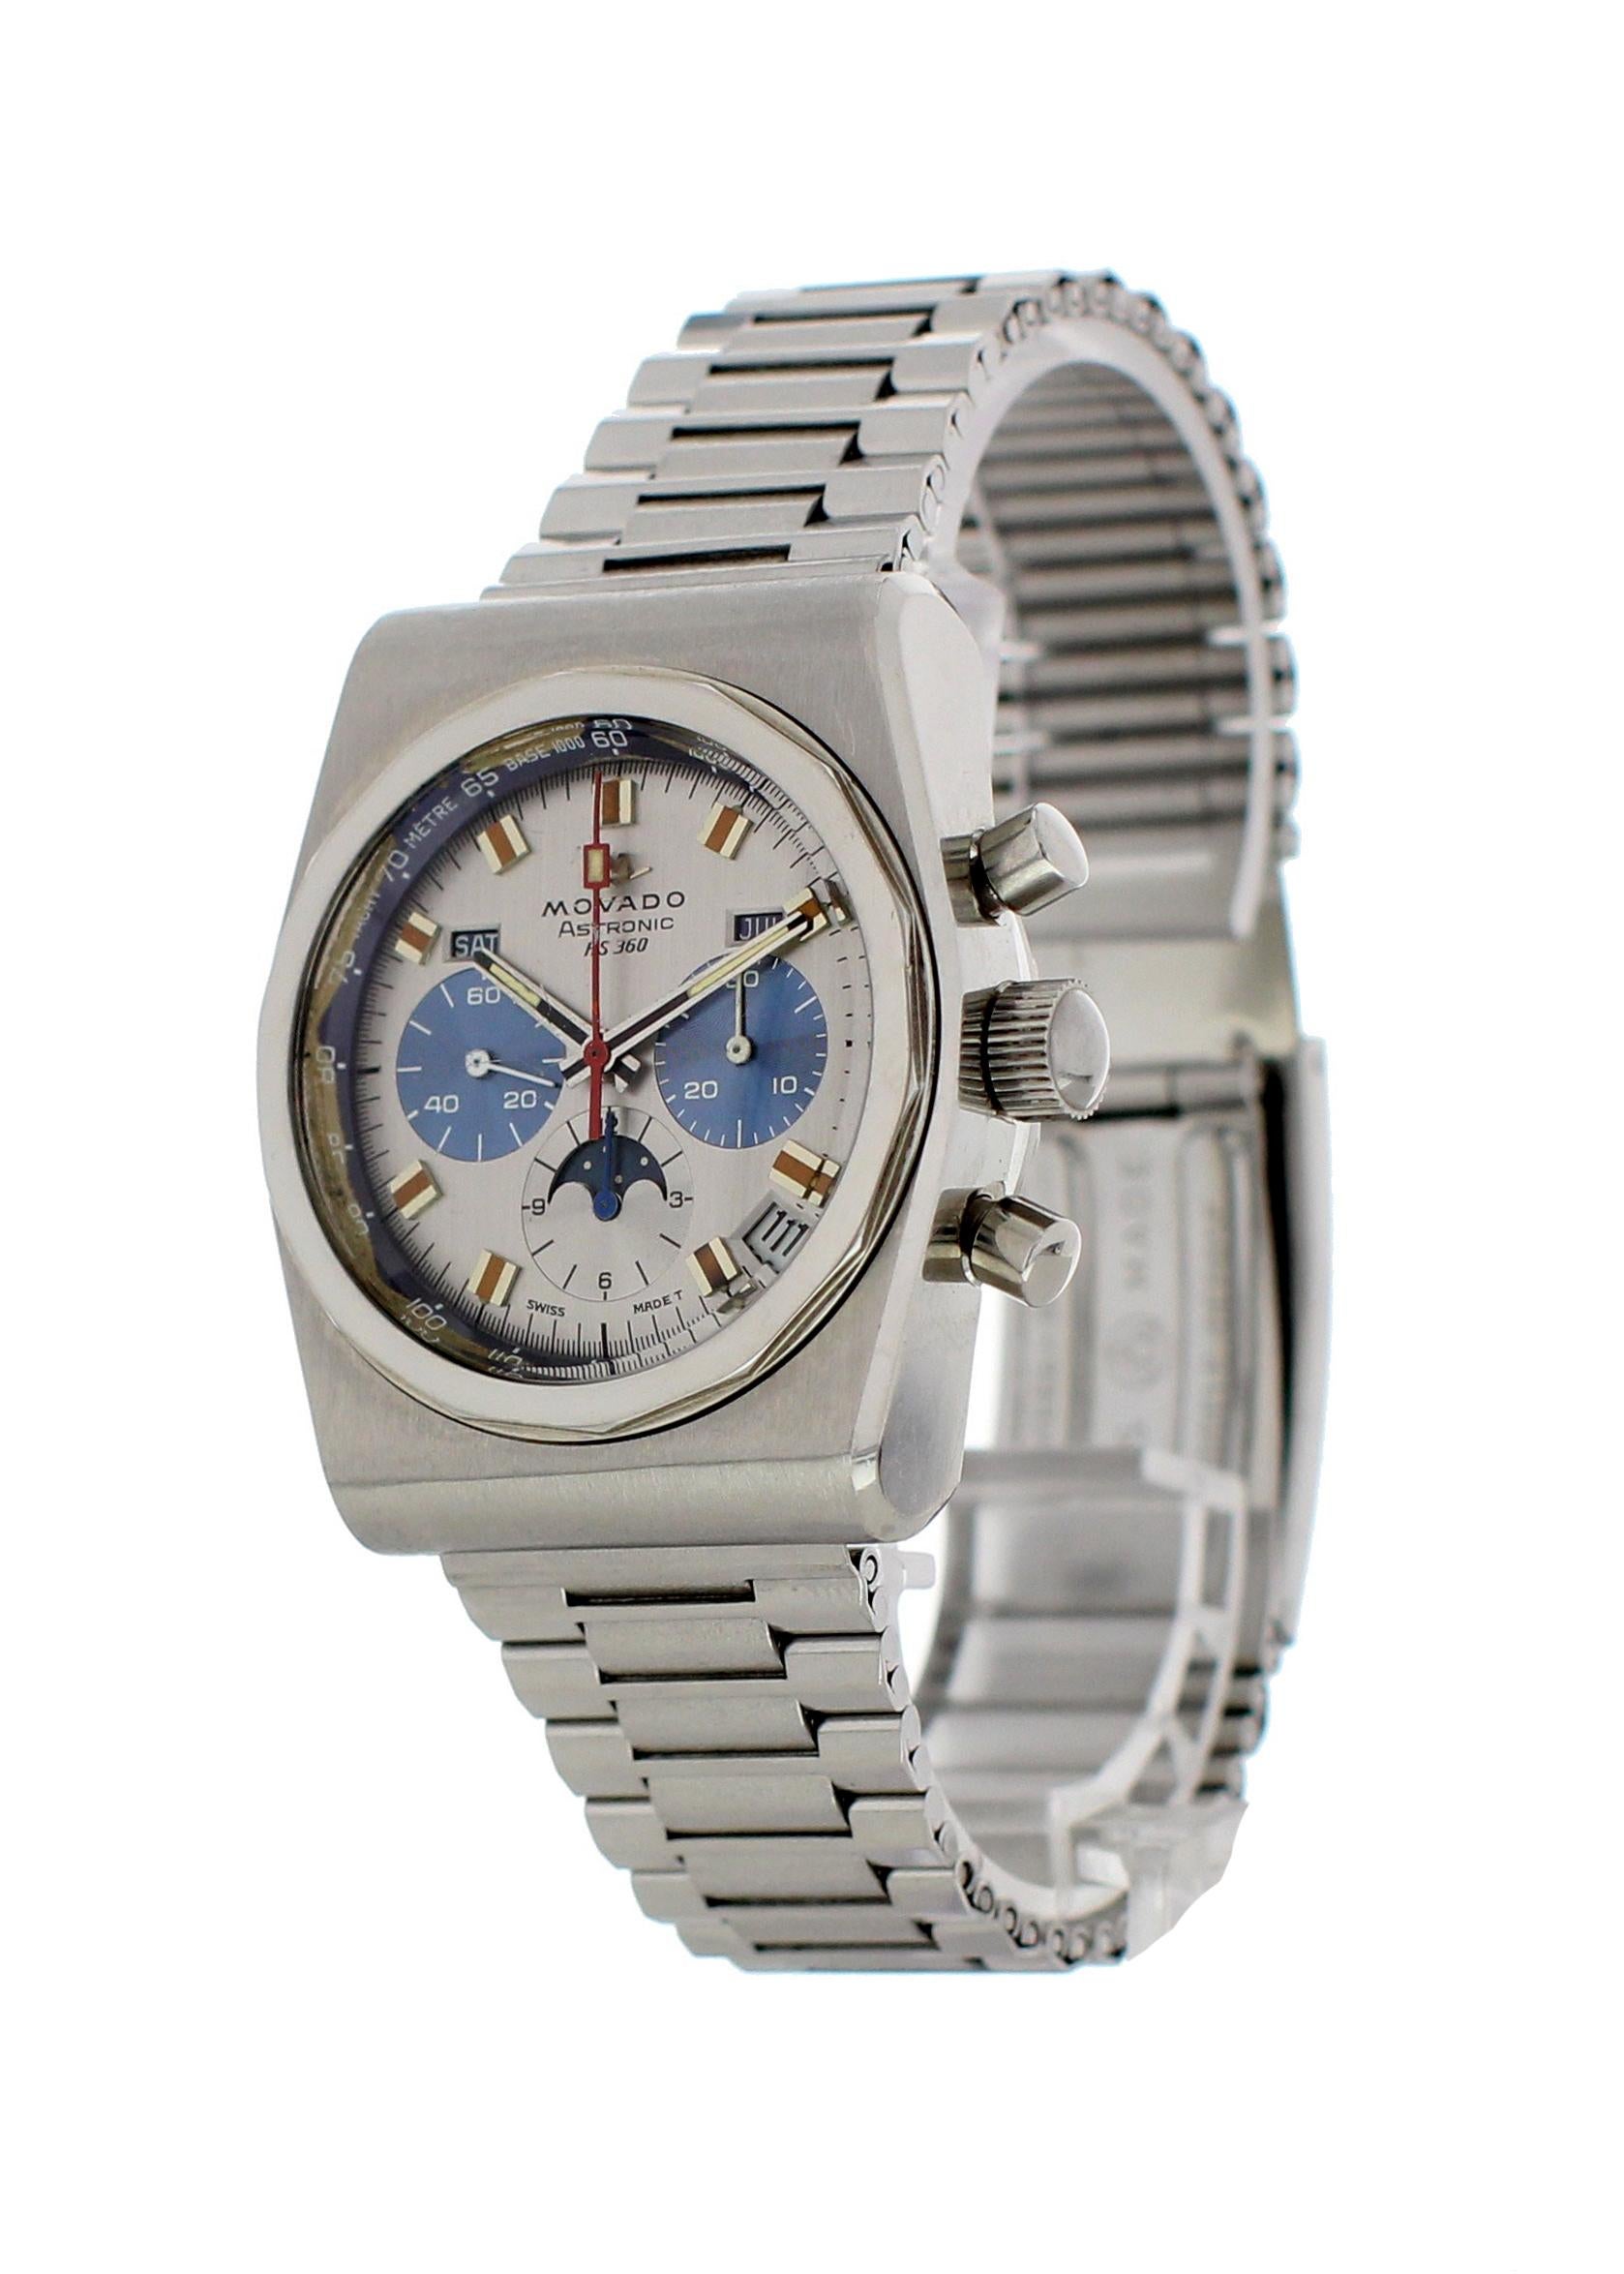 Movado HS 360 Astronic 01.0010.436 Mens Vintage Watch. 38 mm stainless steel case with smooth bezel. Silver dial with steel luminous hands and indexes. Three chronograph subdials displaying minutes seconds and hours. Day date and month display. Moon